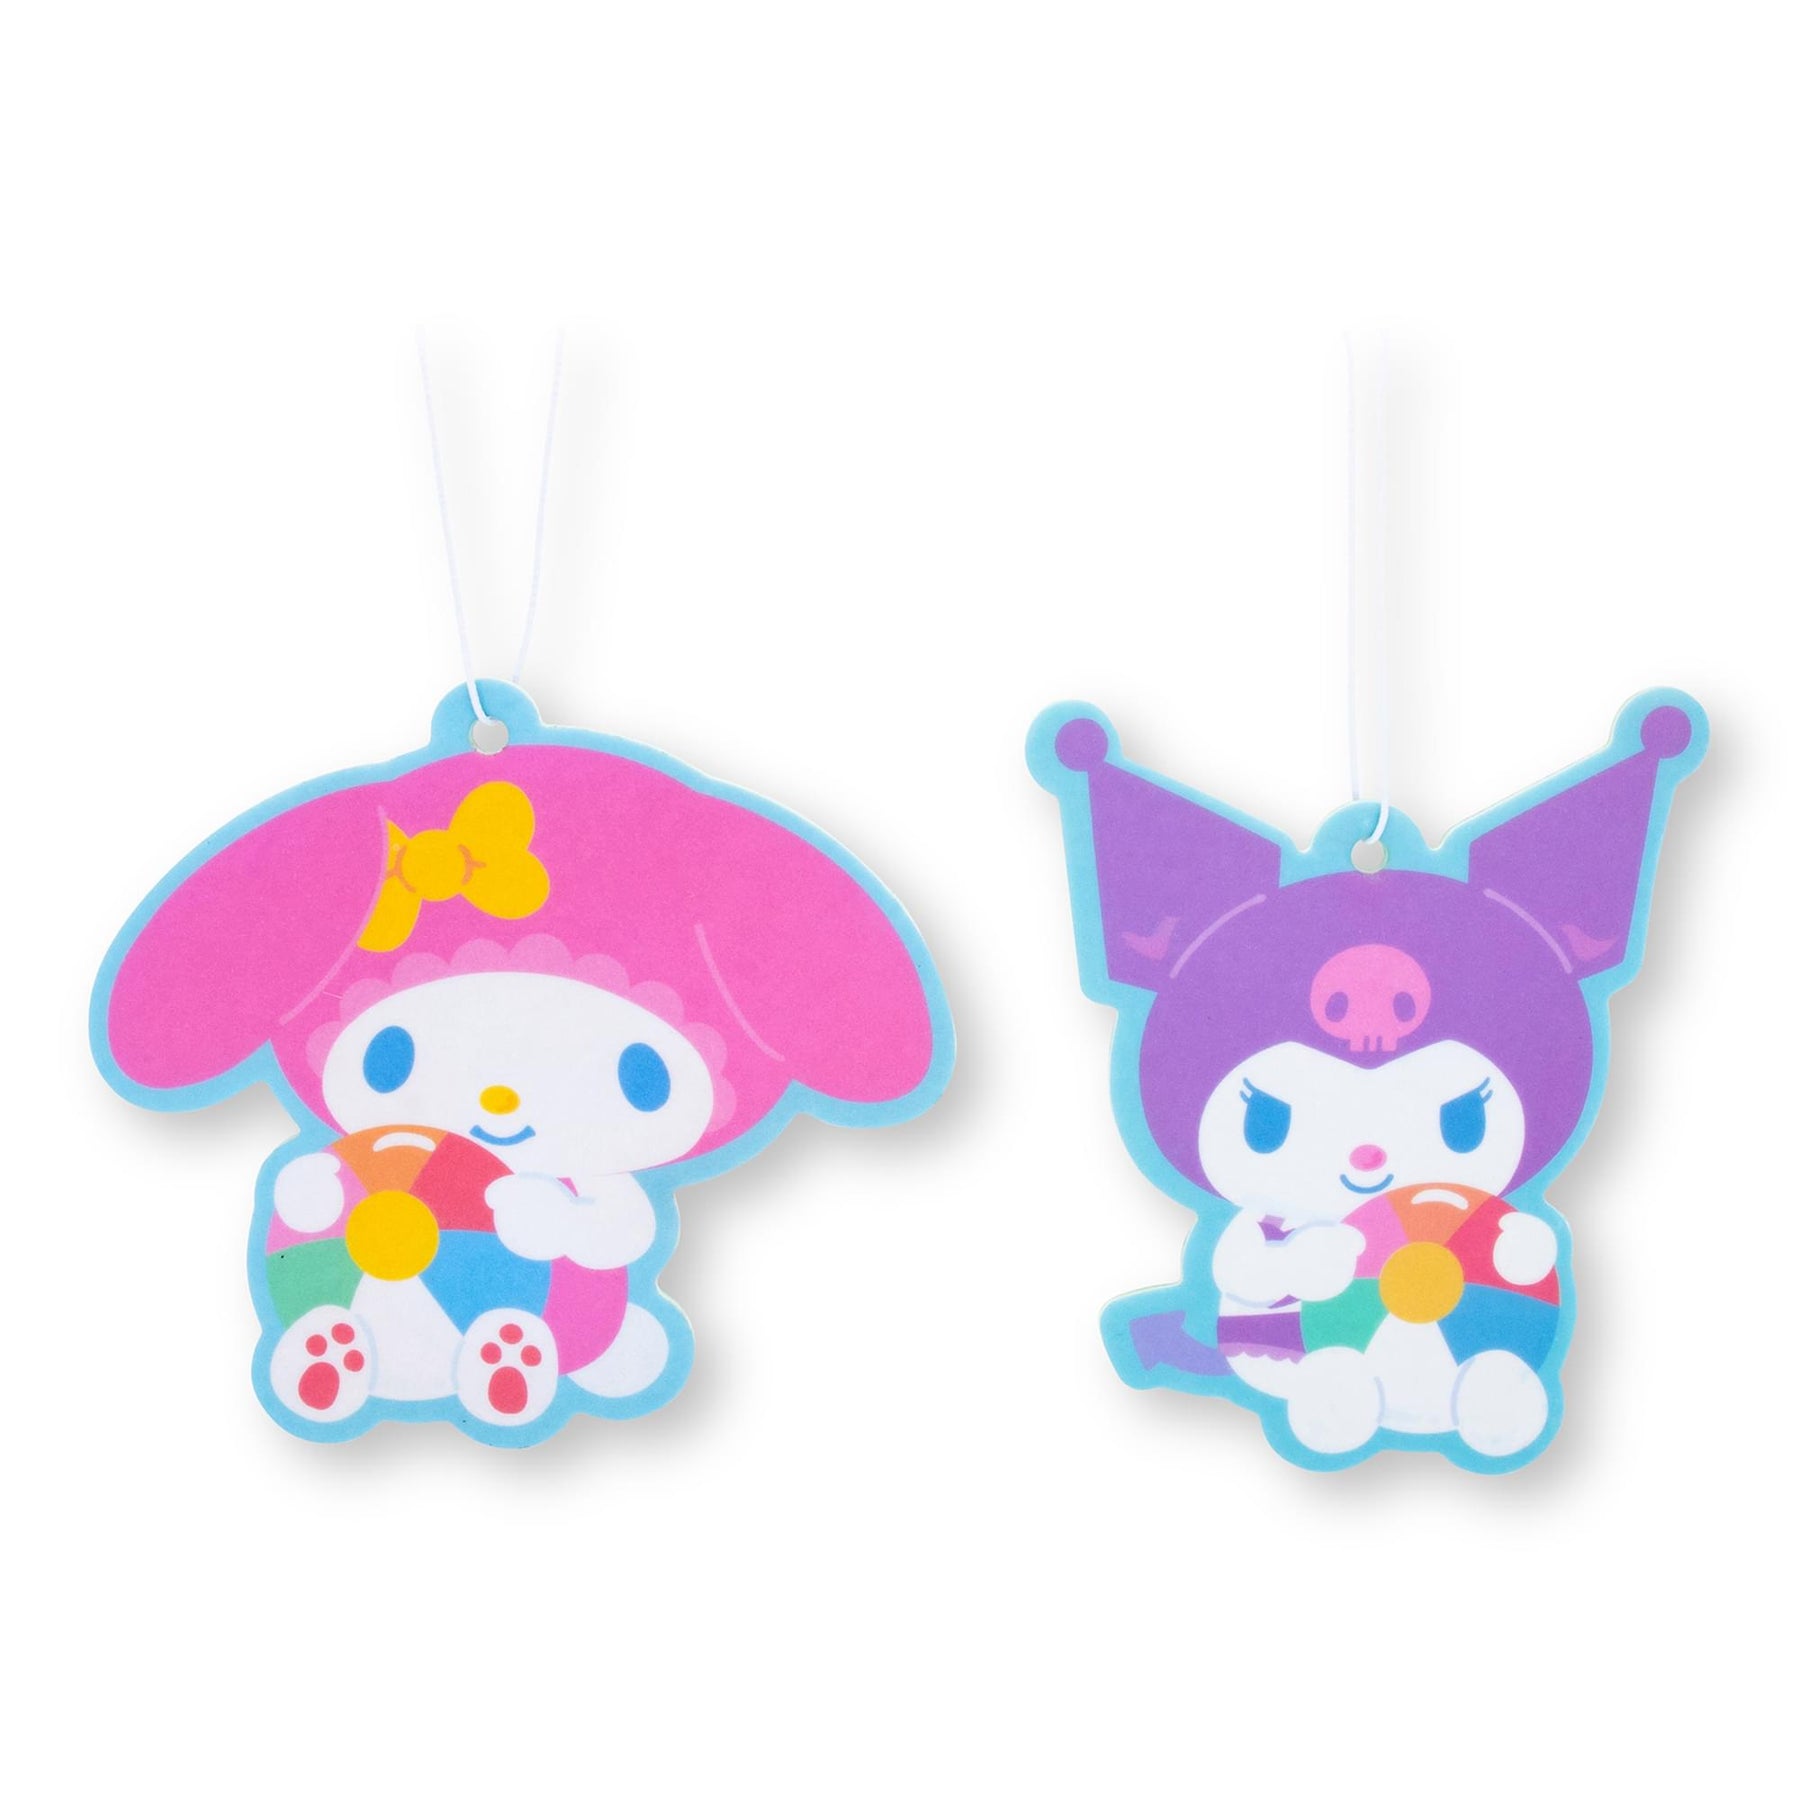 Sanrio Hello Kitty And Friends - My Melody and Kuromi Air Freshener 2